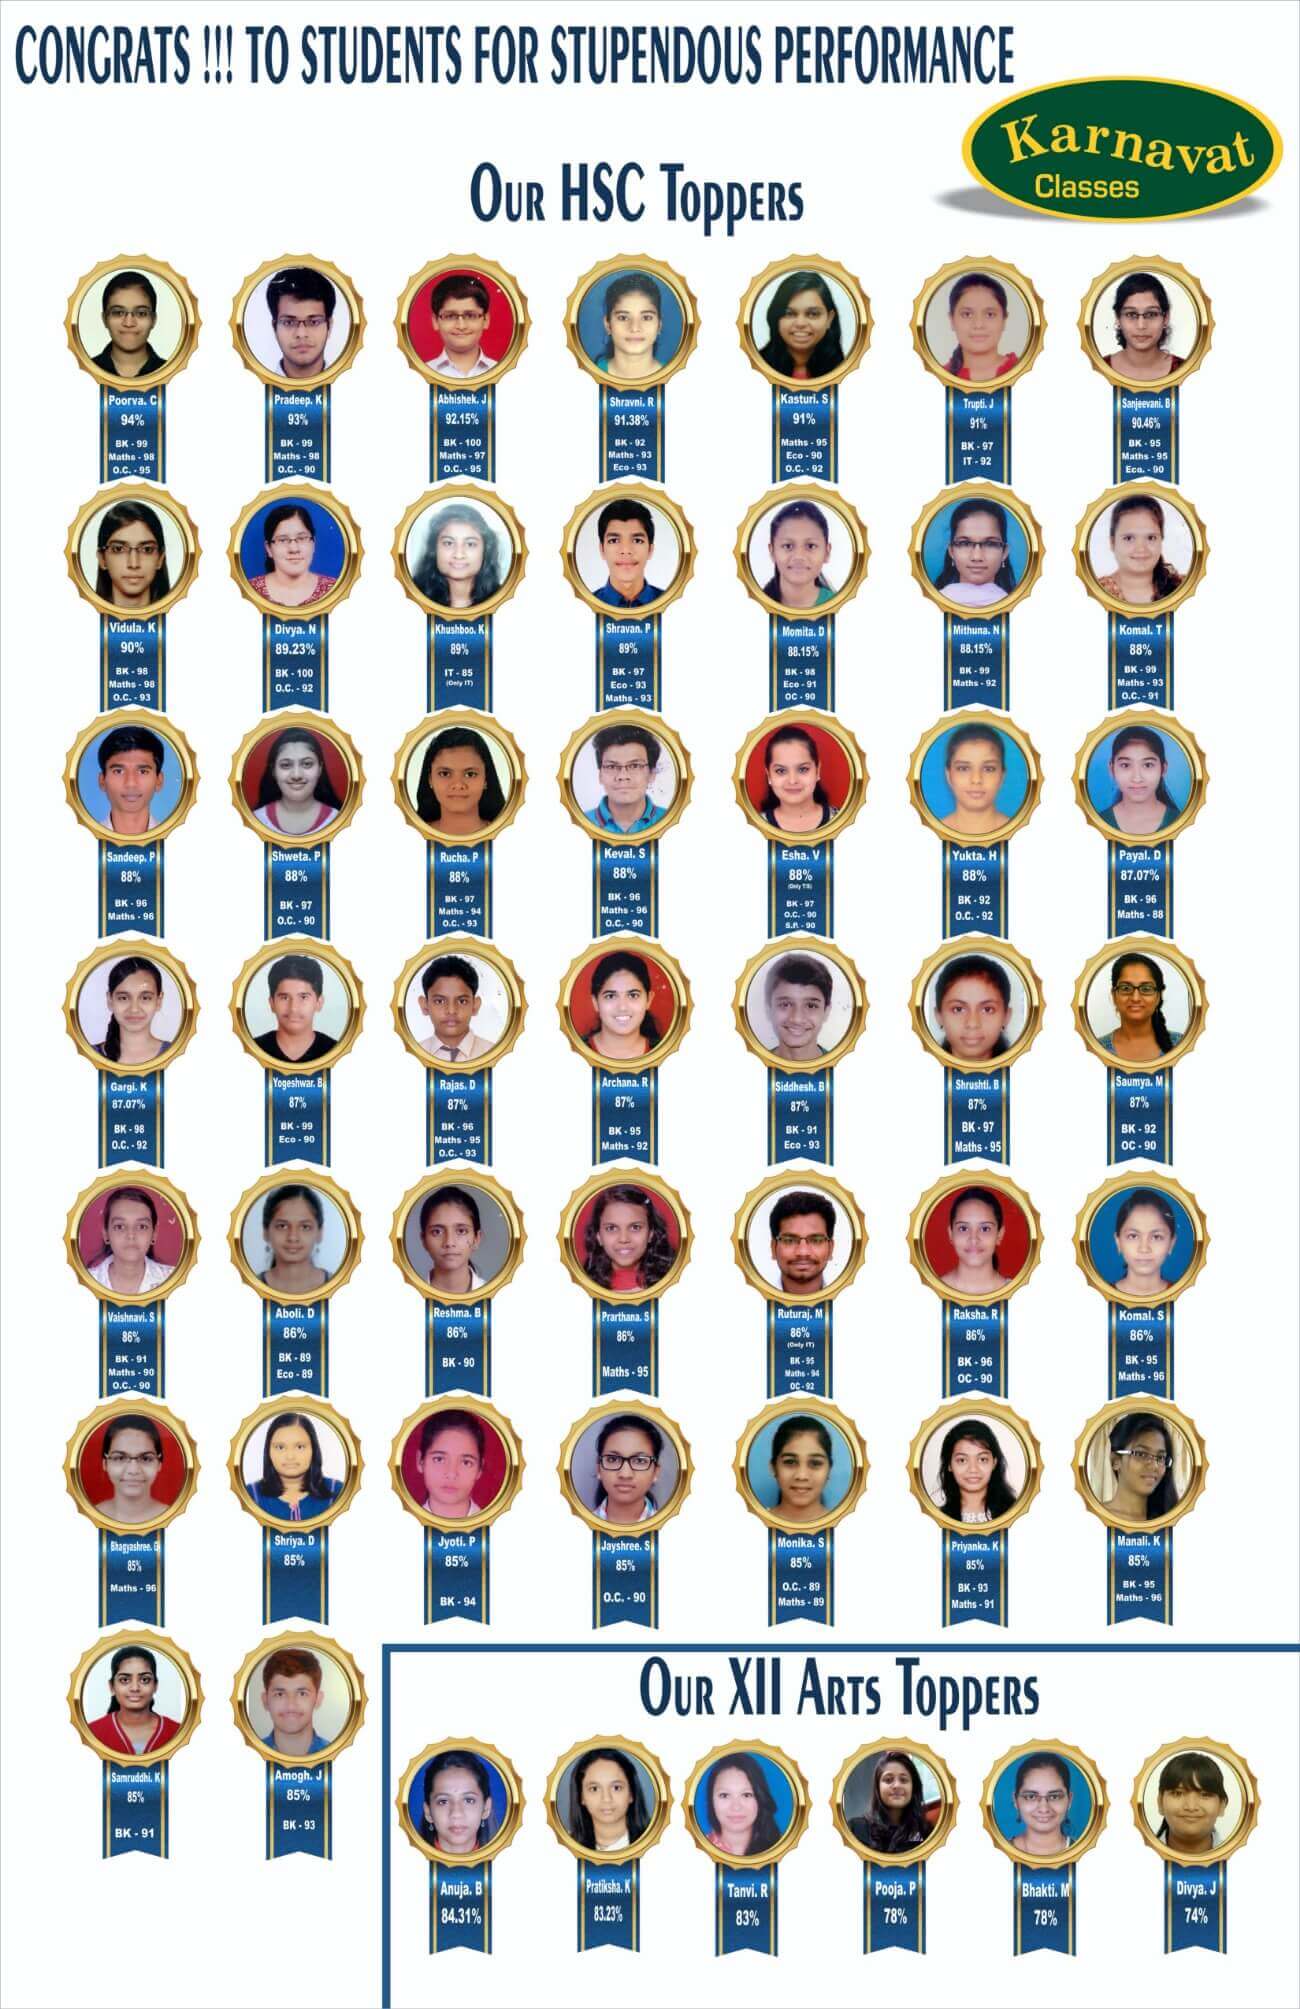 OUR HSC TOPPERS